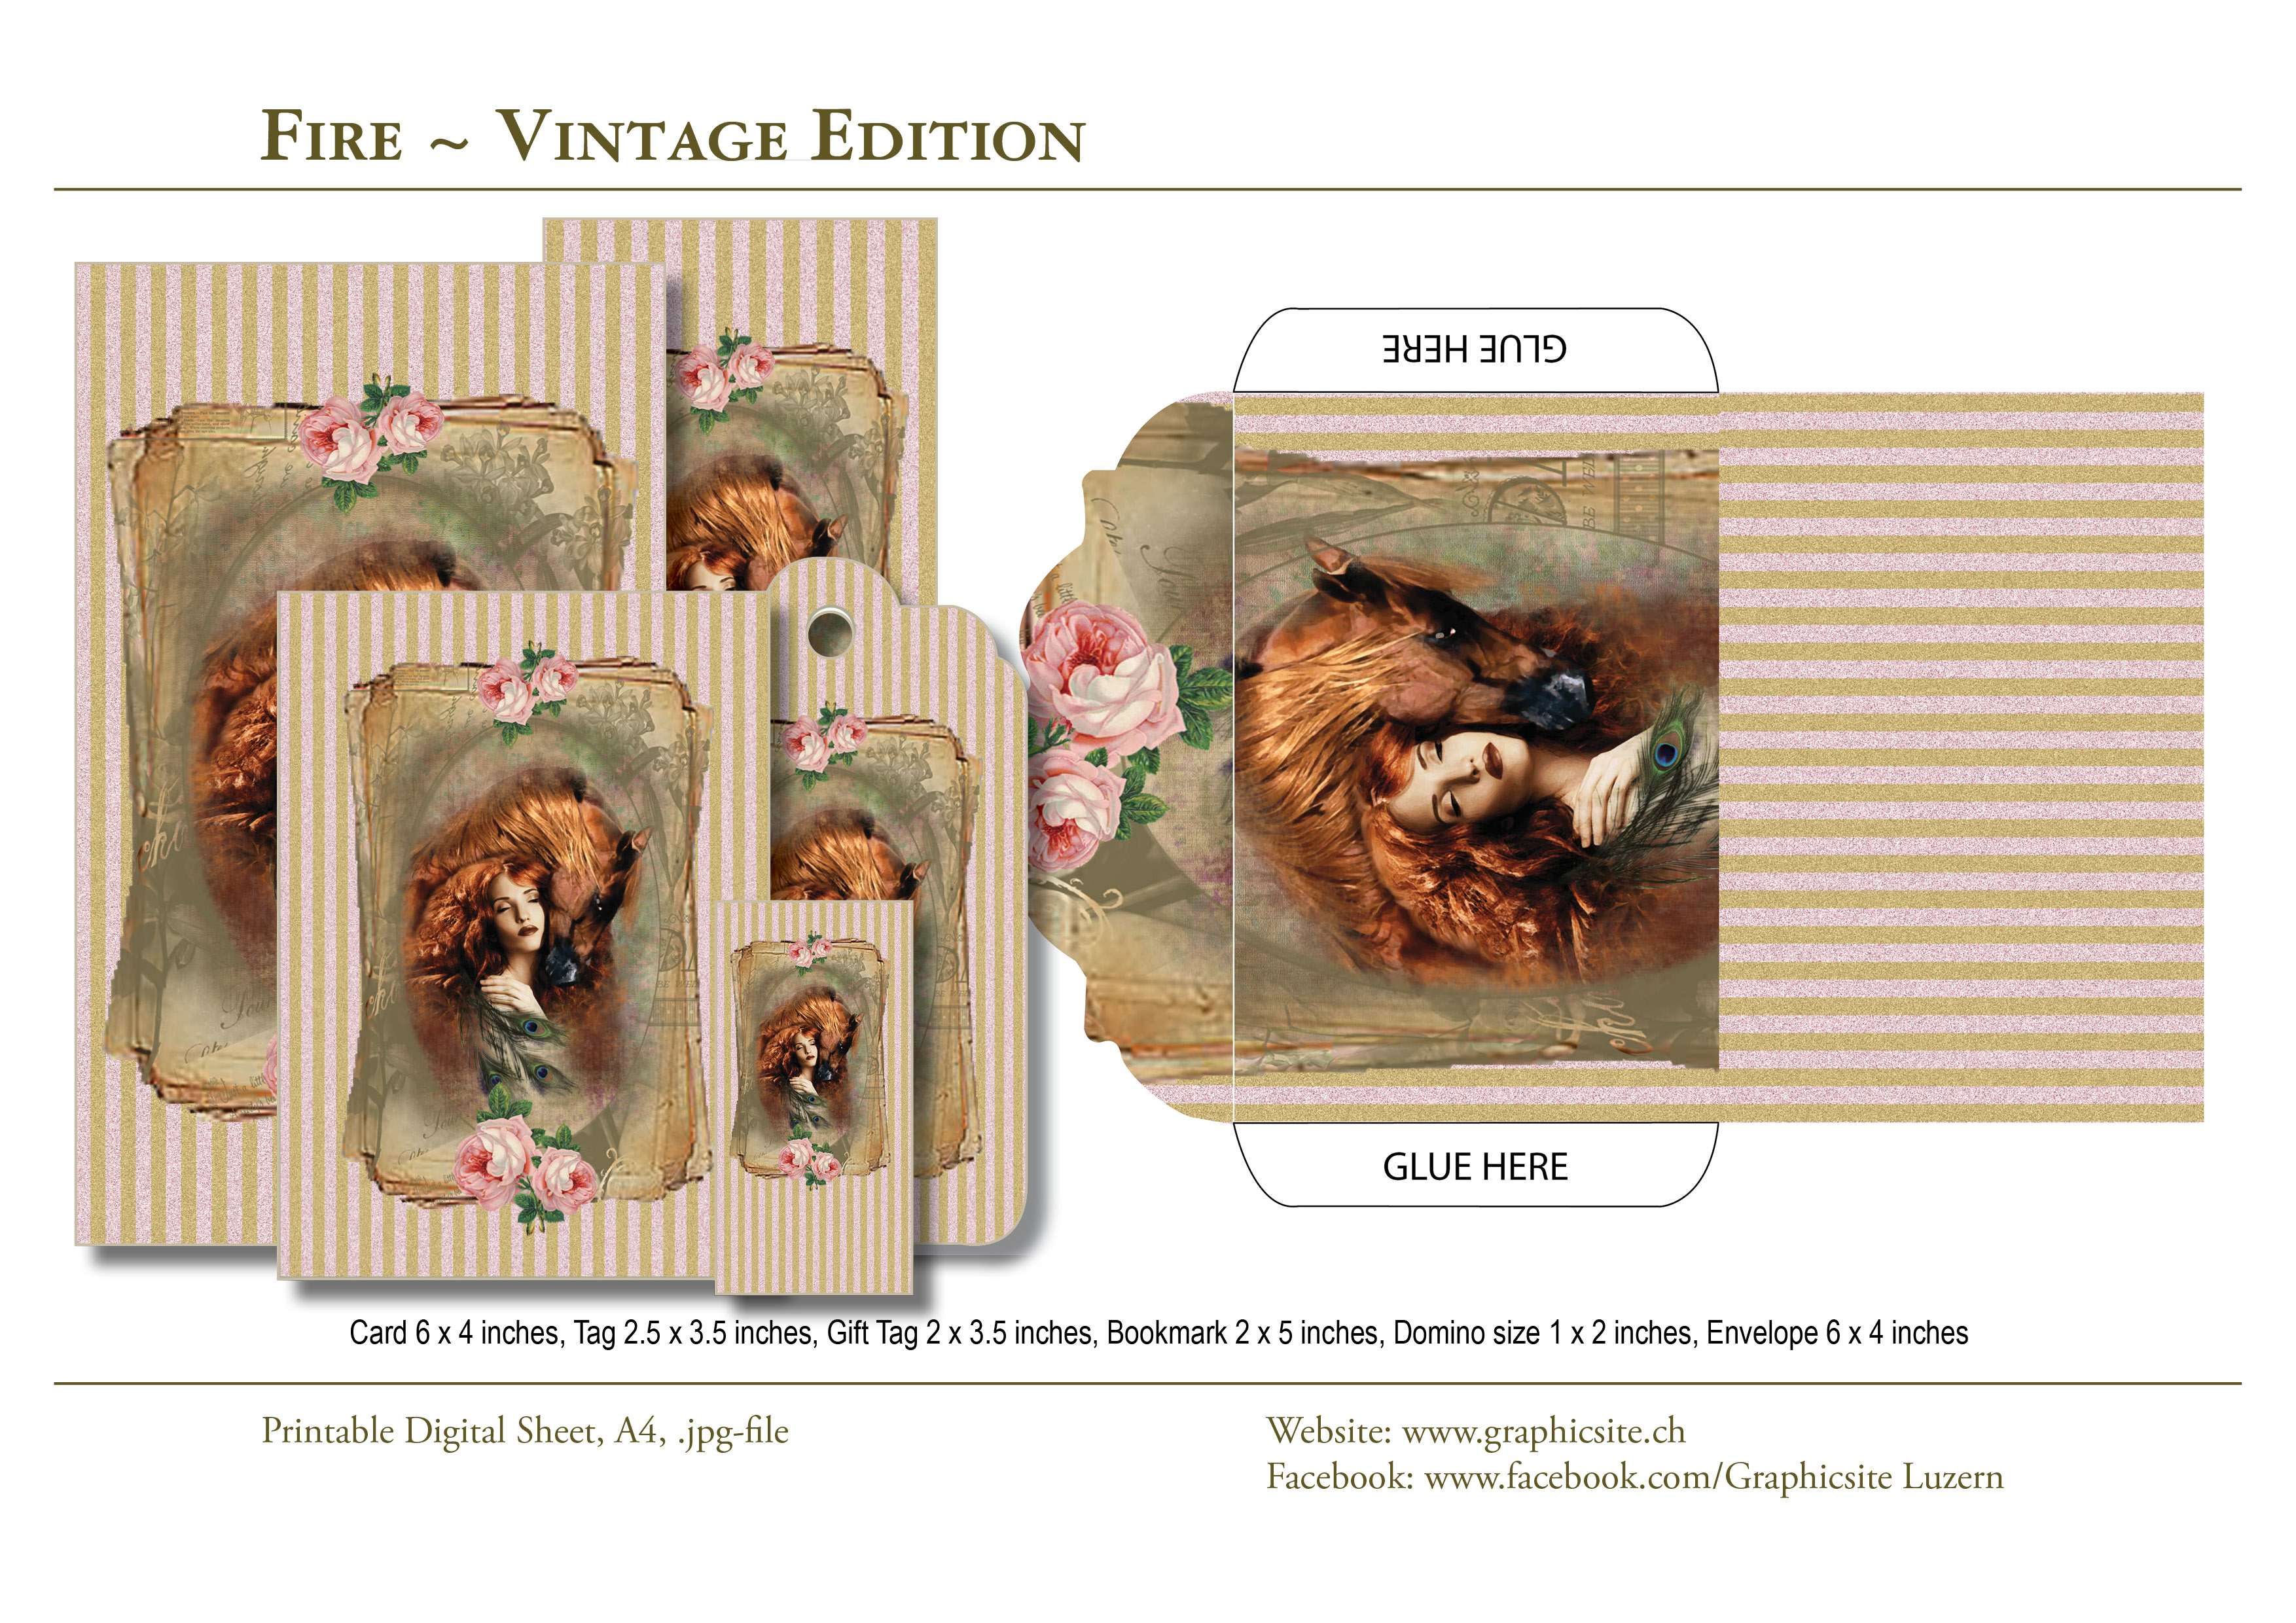 Printable Digital Collages - Collections - Fire_VintageEdition